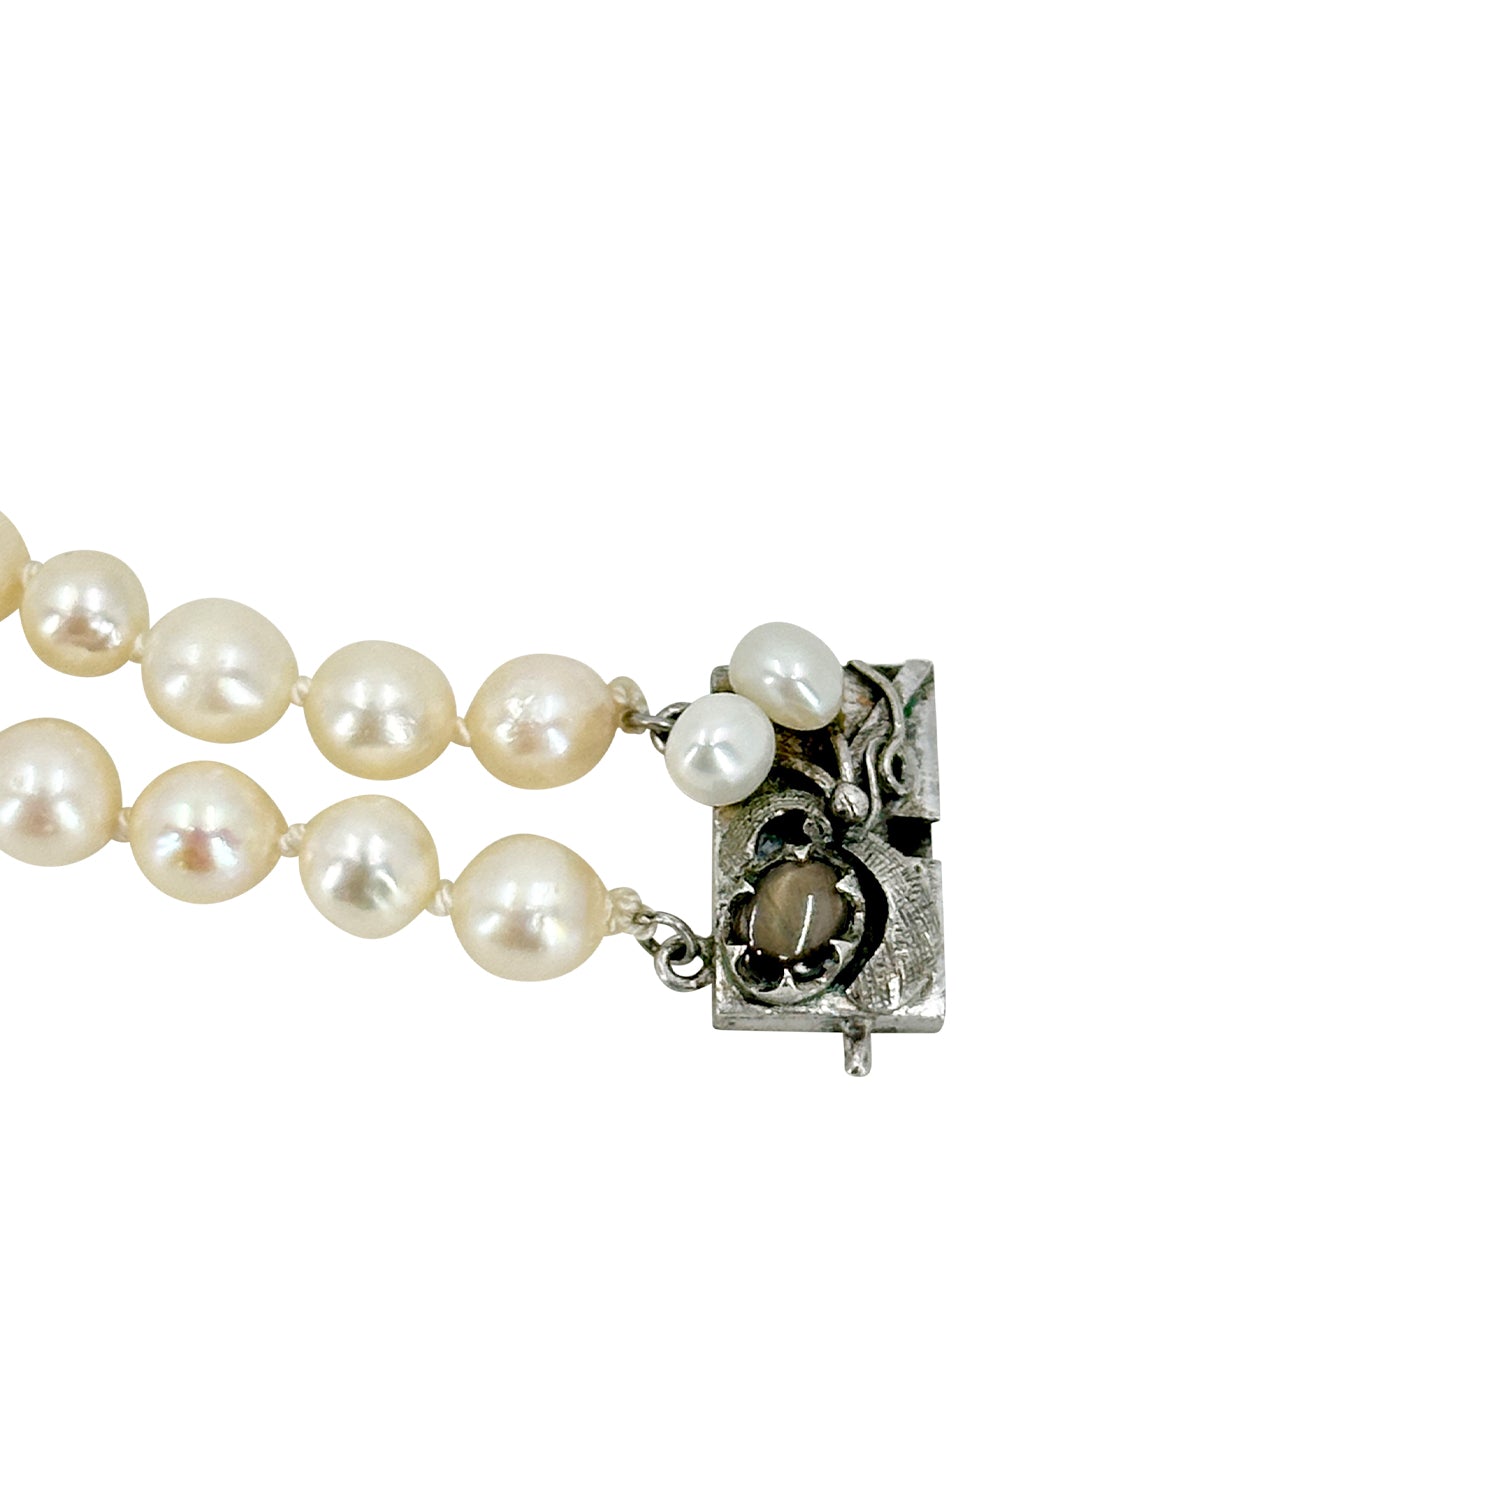 Star Sapphire Double Strand Baroque Japanese Saltwater Akoya Cultured Pearl Vintage Bracelet -Sterling Silver